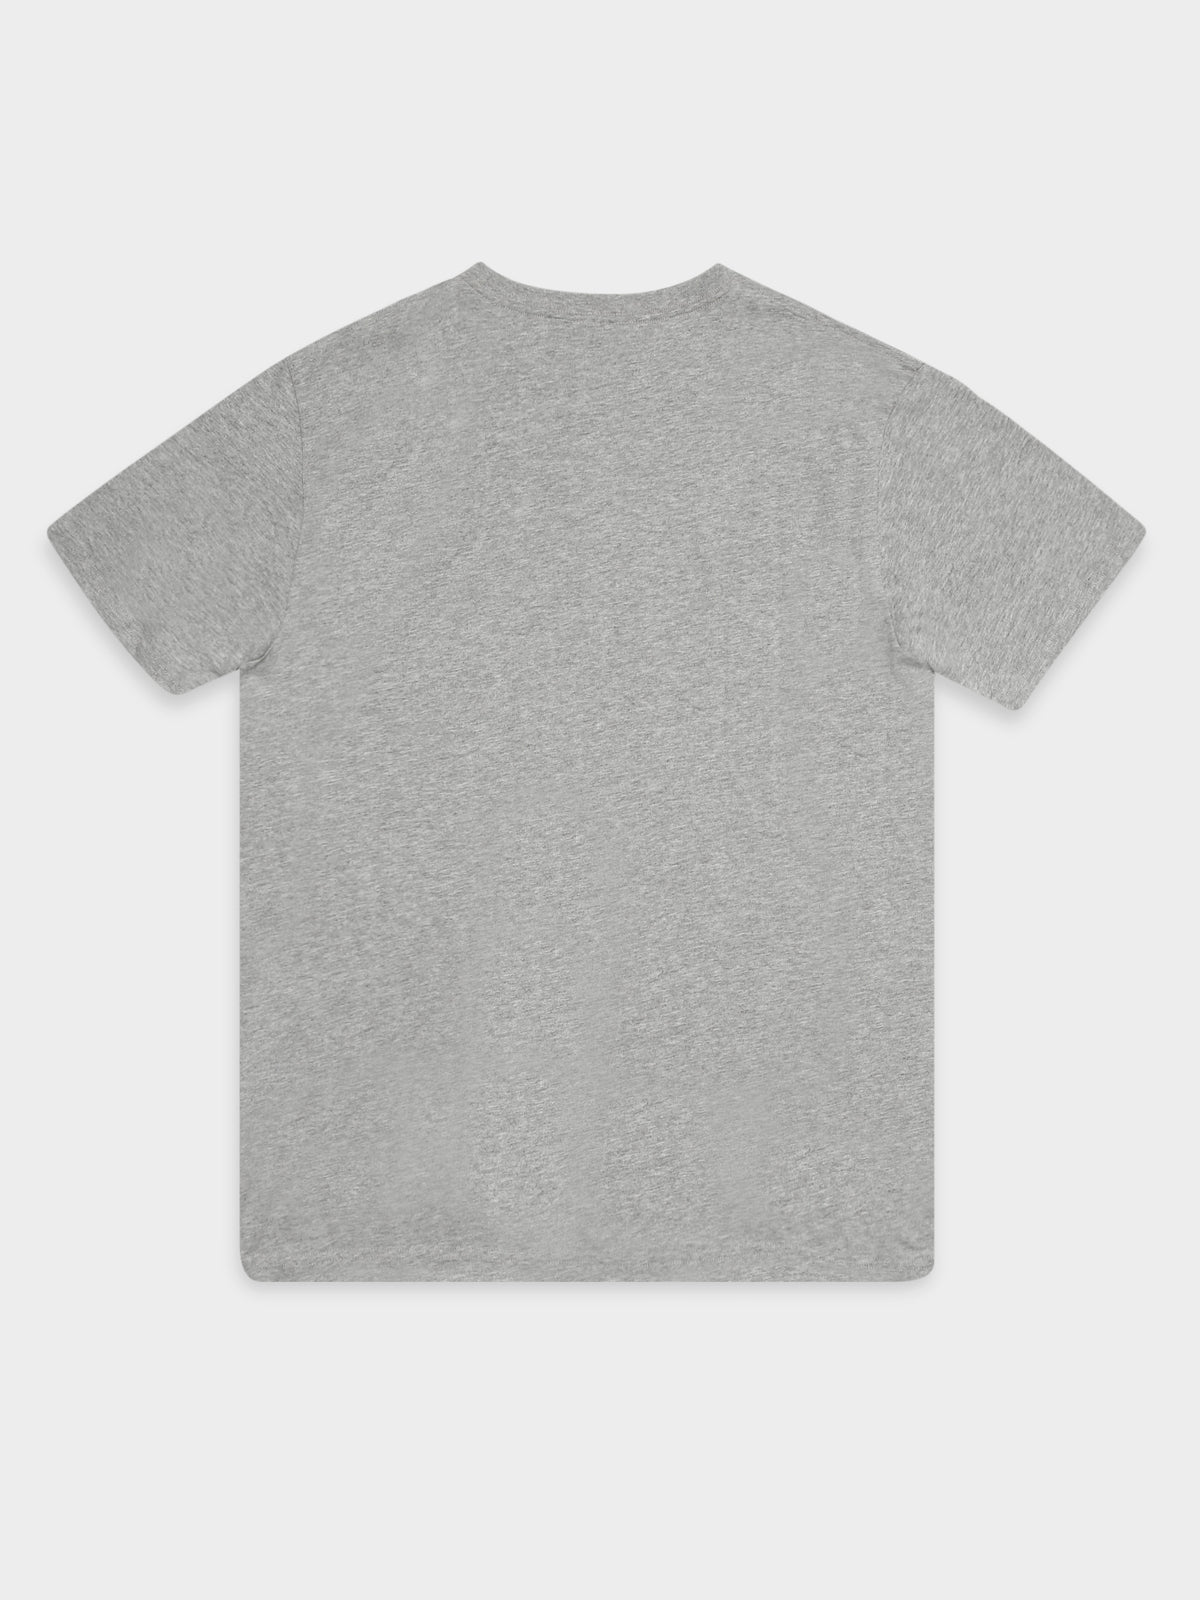 United Reflective T-Shirt in Grey Marle